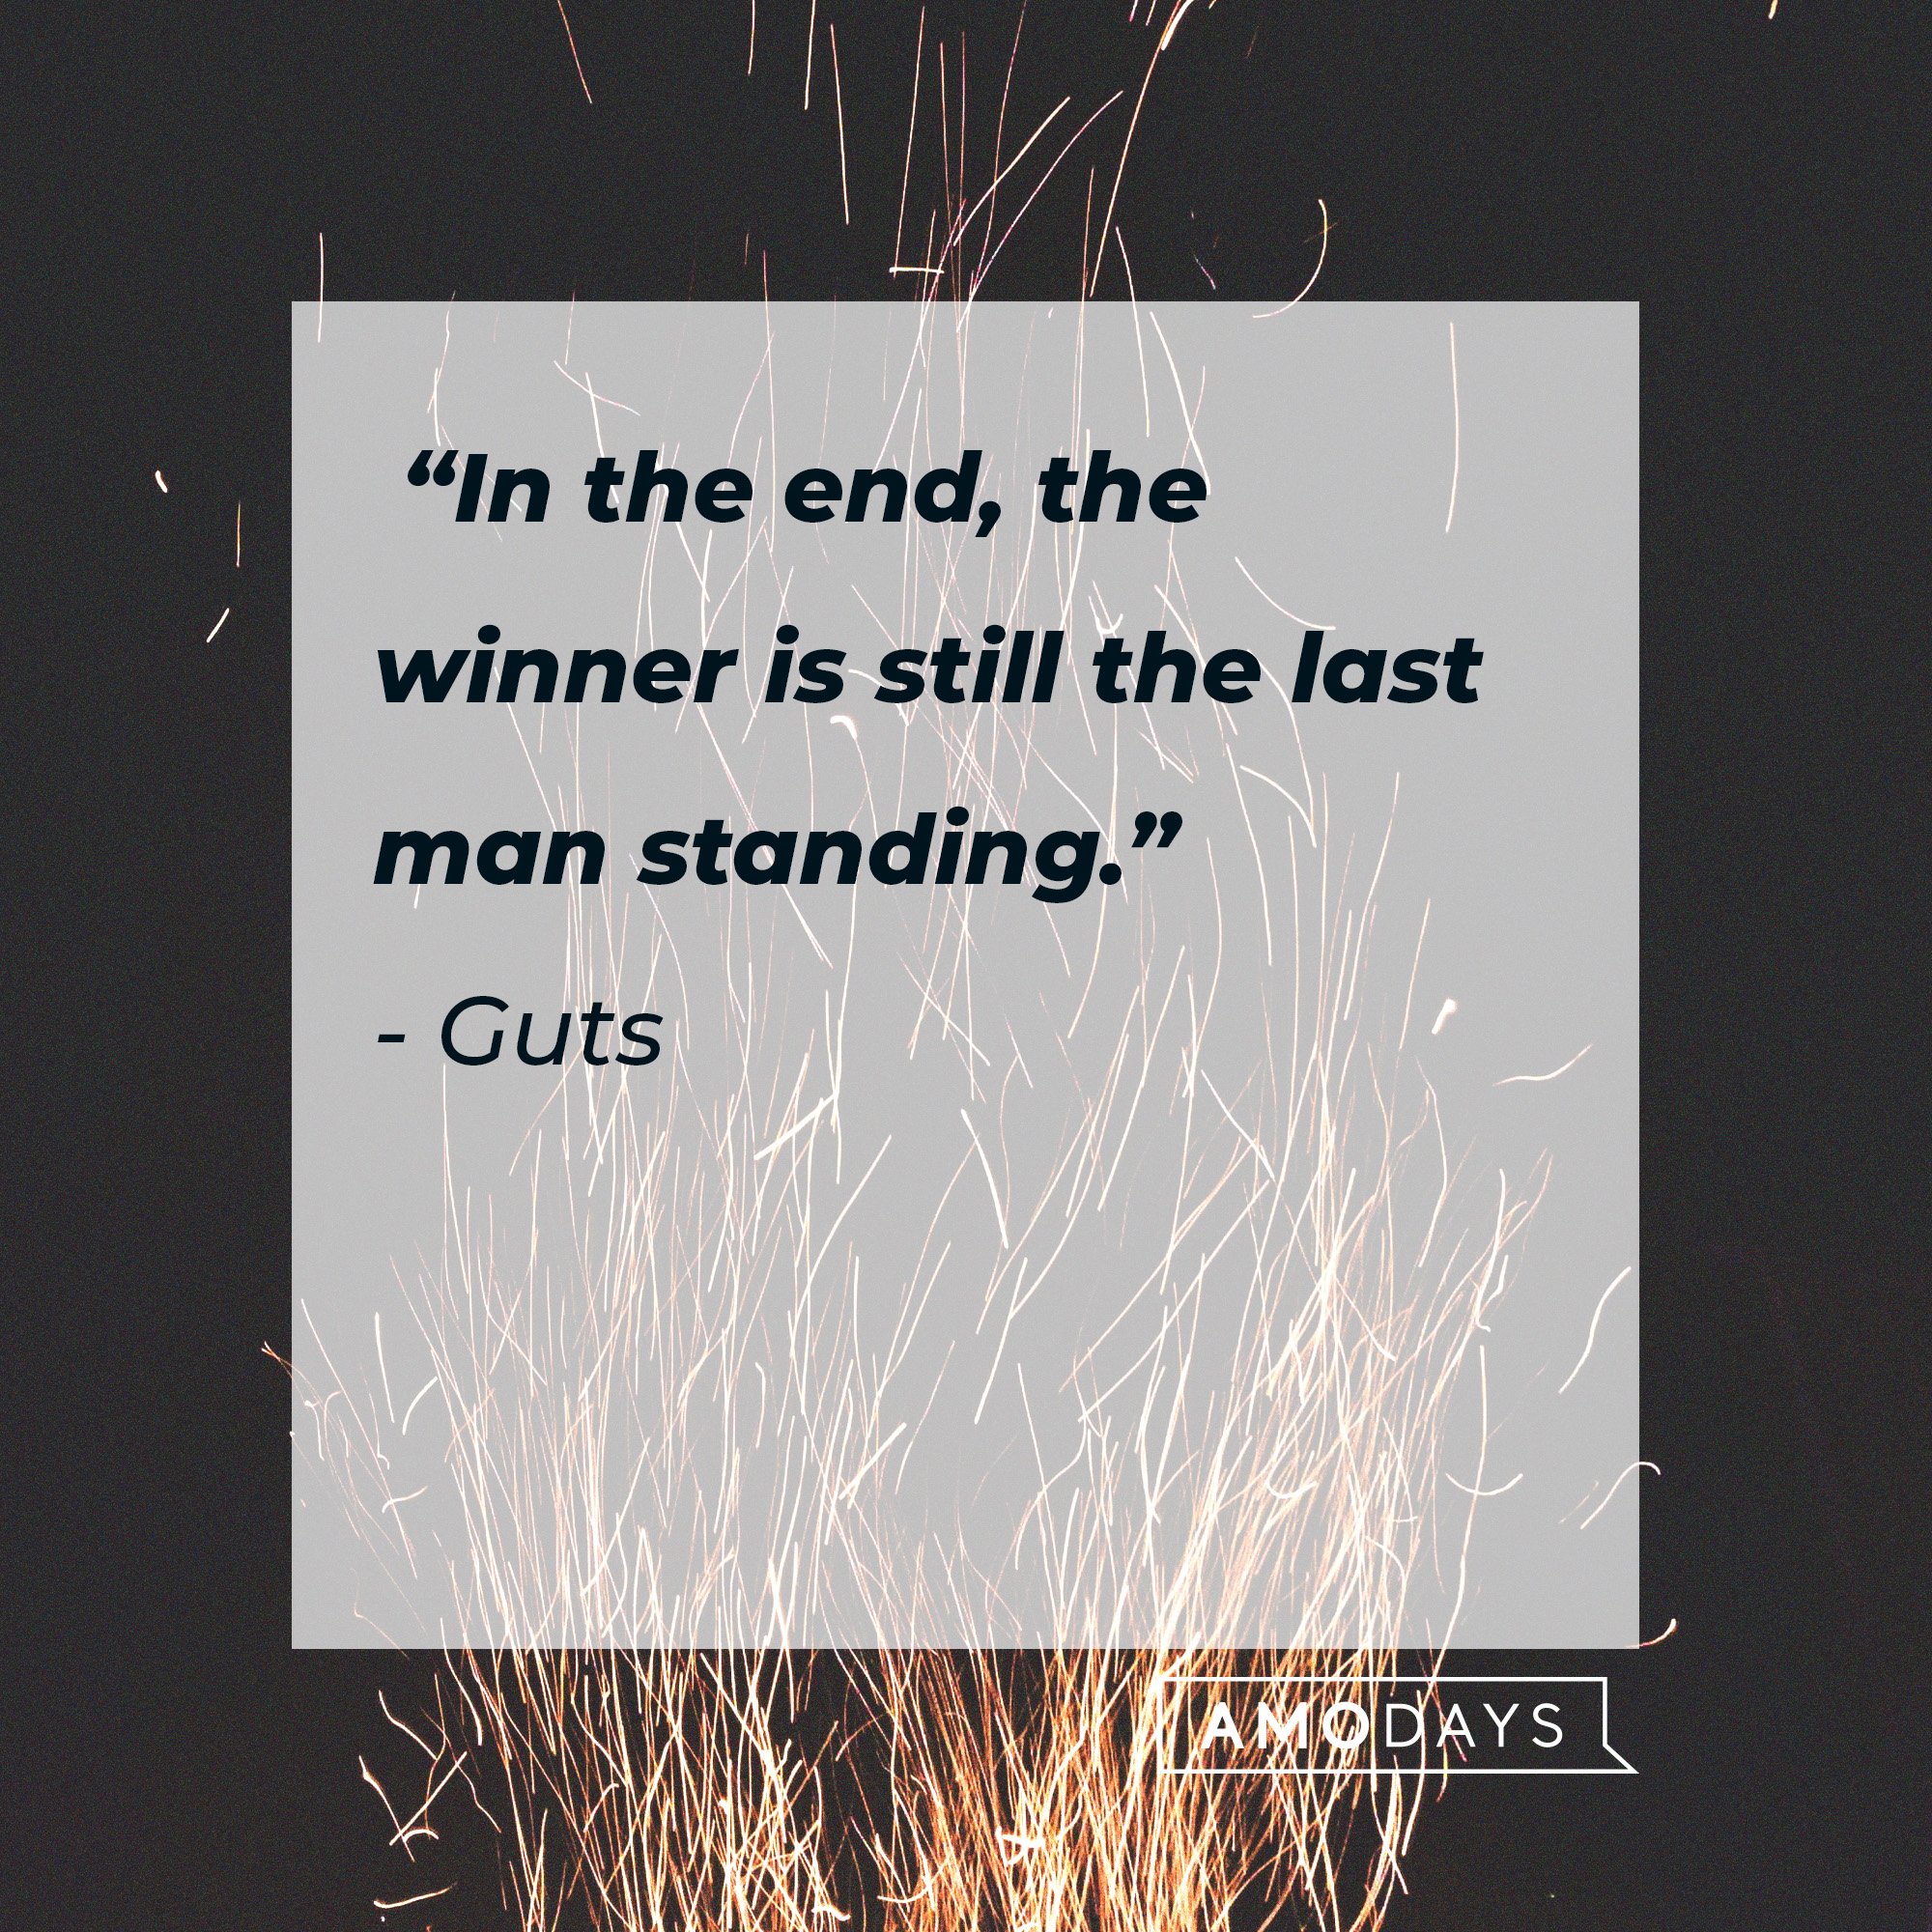   Guts's quote: “In the end, the winner is still the last man standing.” | Image: AmoDays